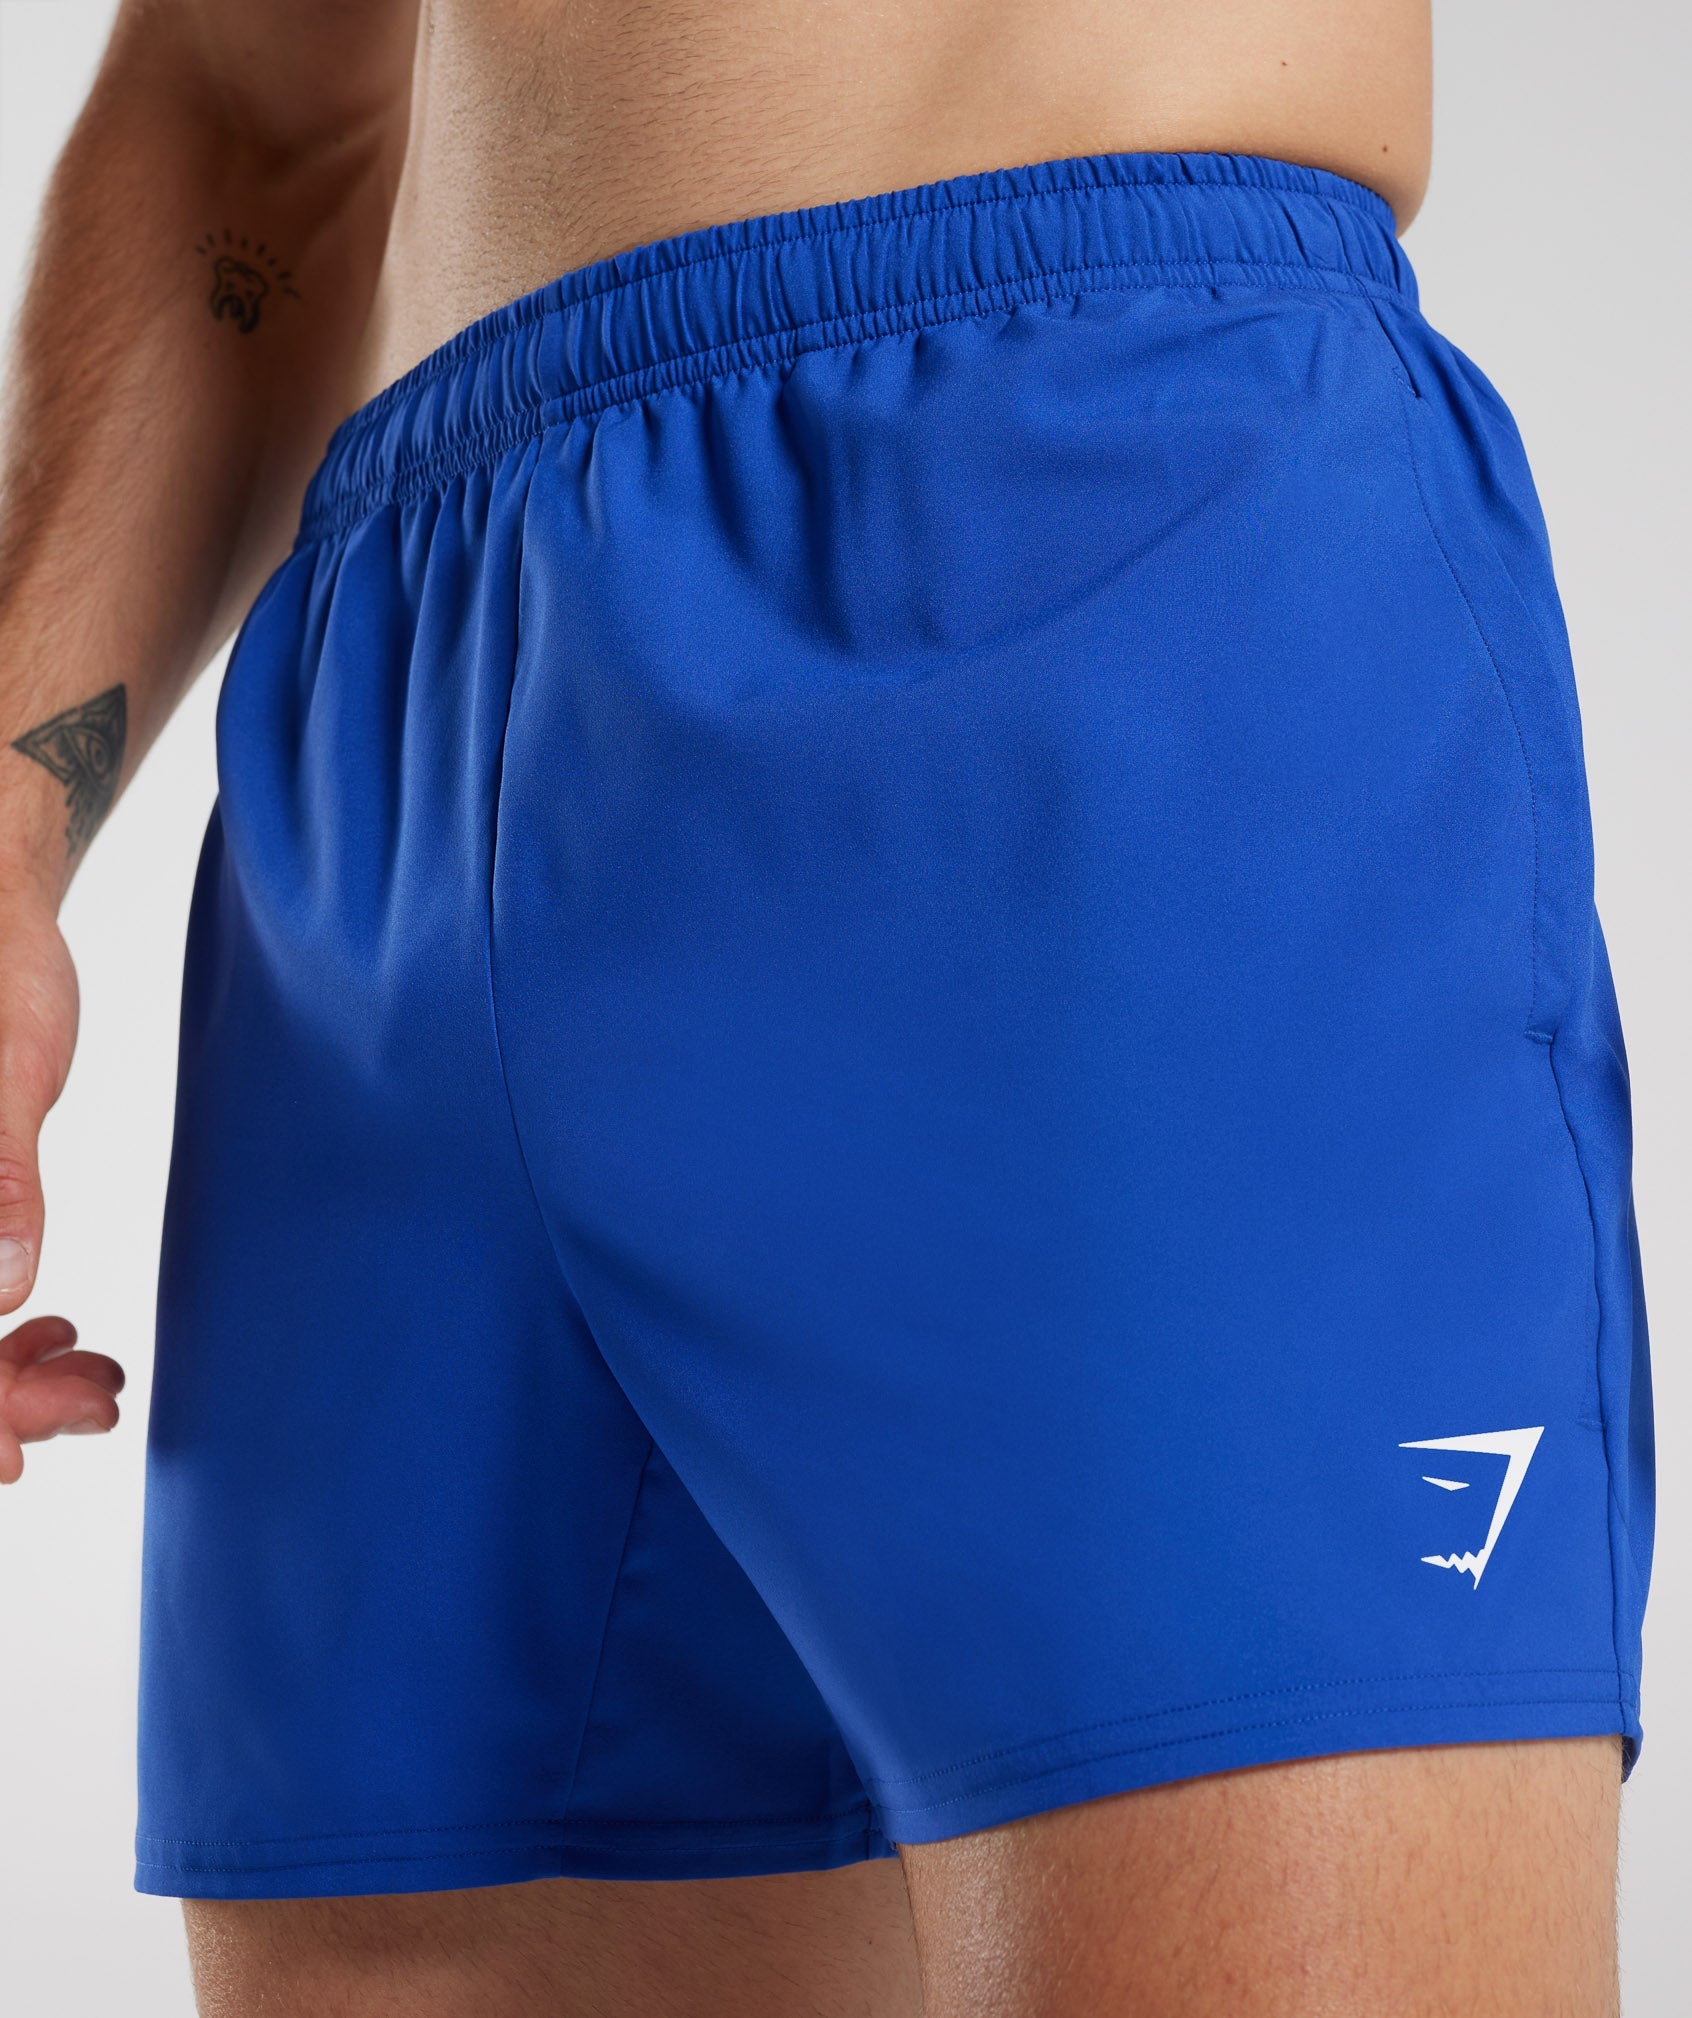 Arrival 5" Shorts in Vintage Blue - view 4